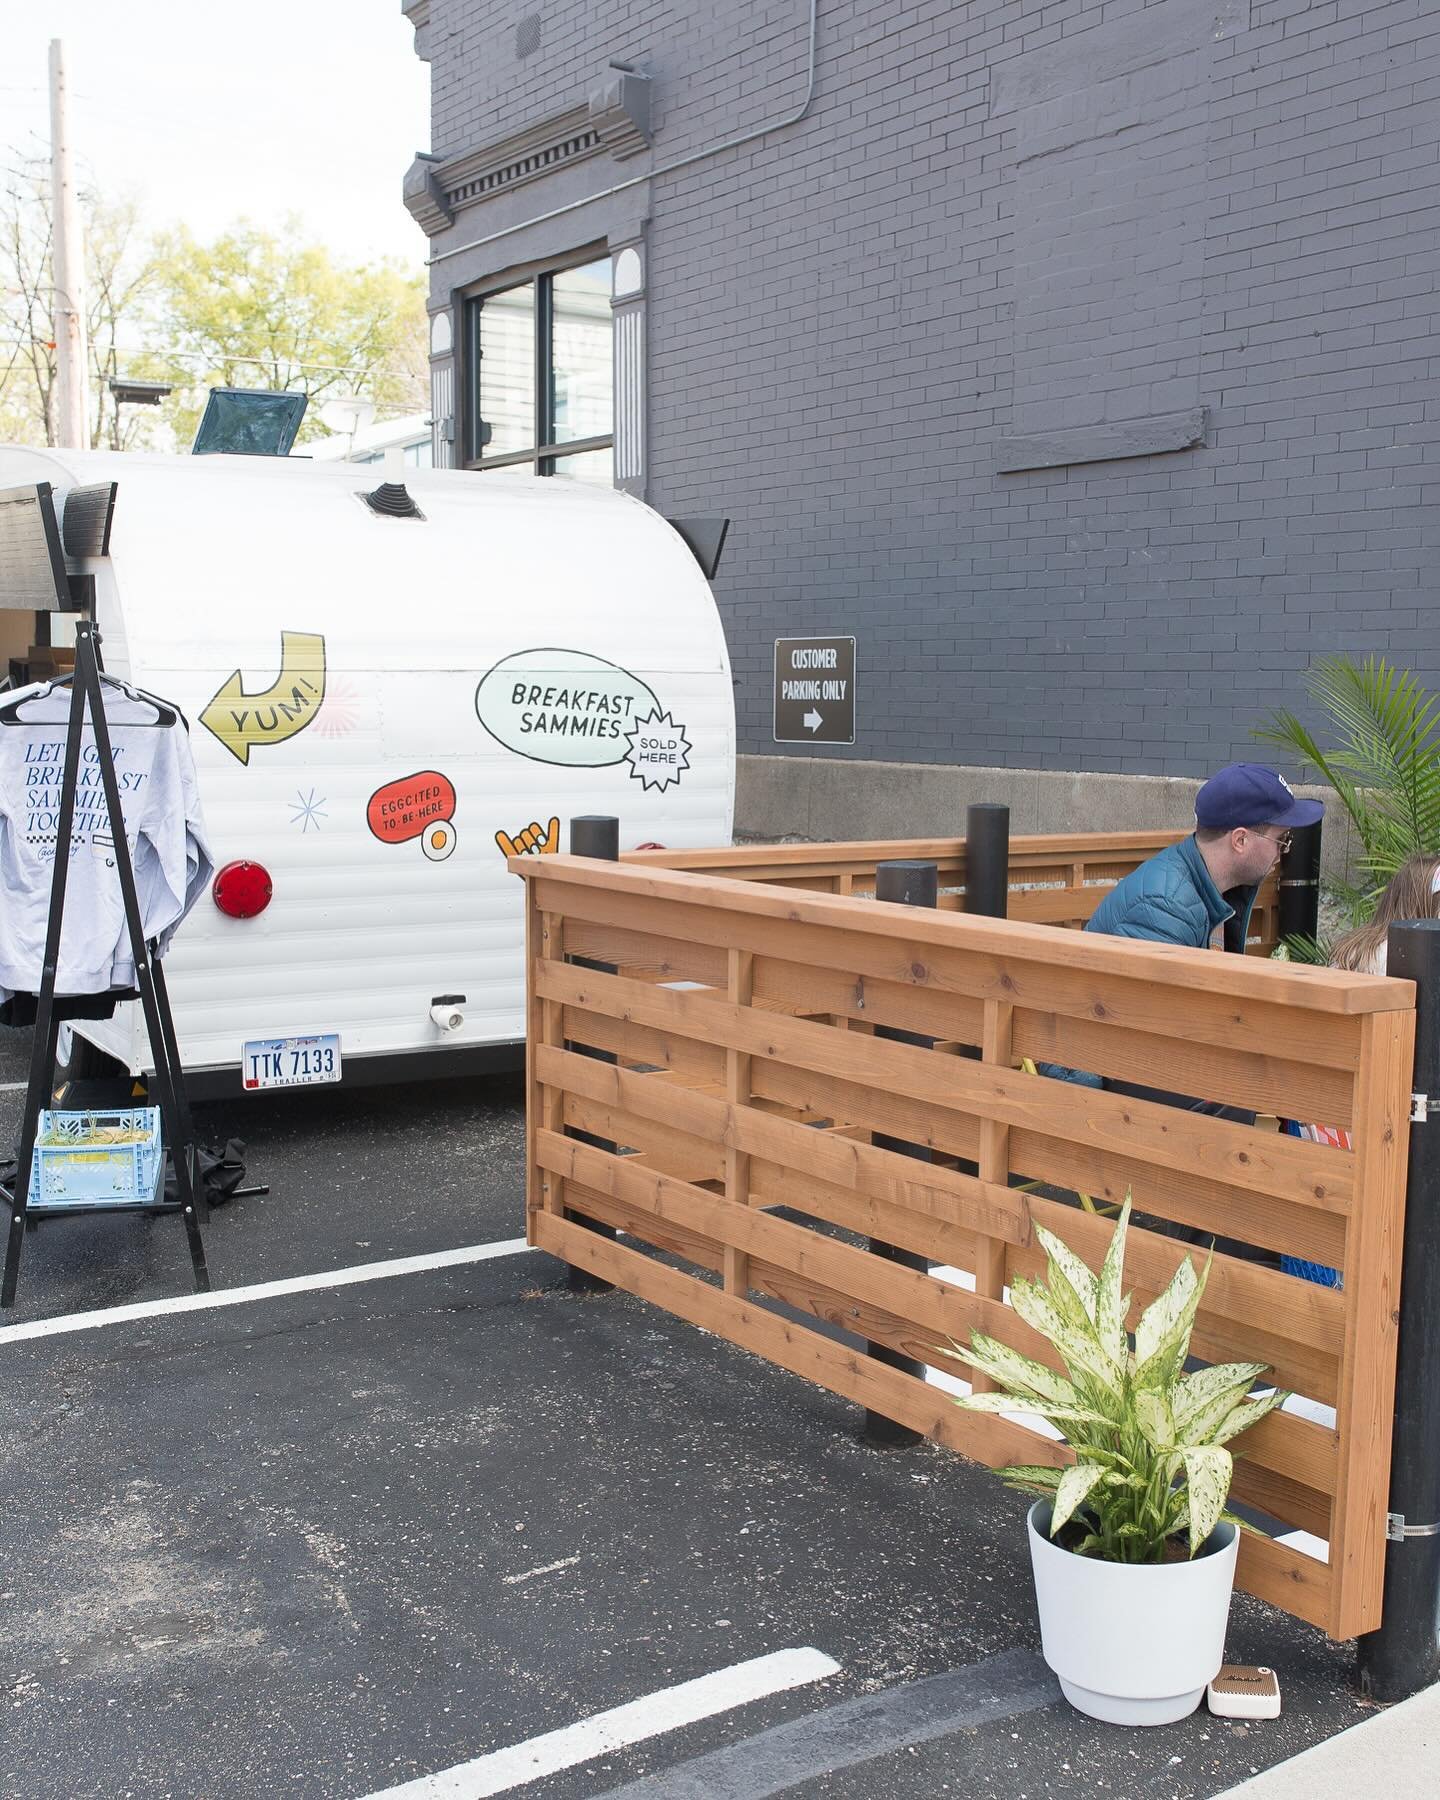 A closer look at our recent fence build for @eatcackleberry&rsquo;s new permanent location. Even for a food trailer, it&rsquo;s important to create a sense of space for your customers. This cedar enclosure gives guests a place to enjoy their breakfas